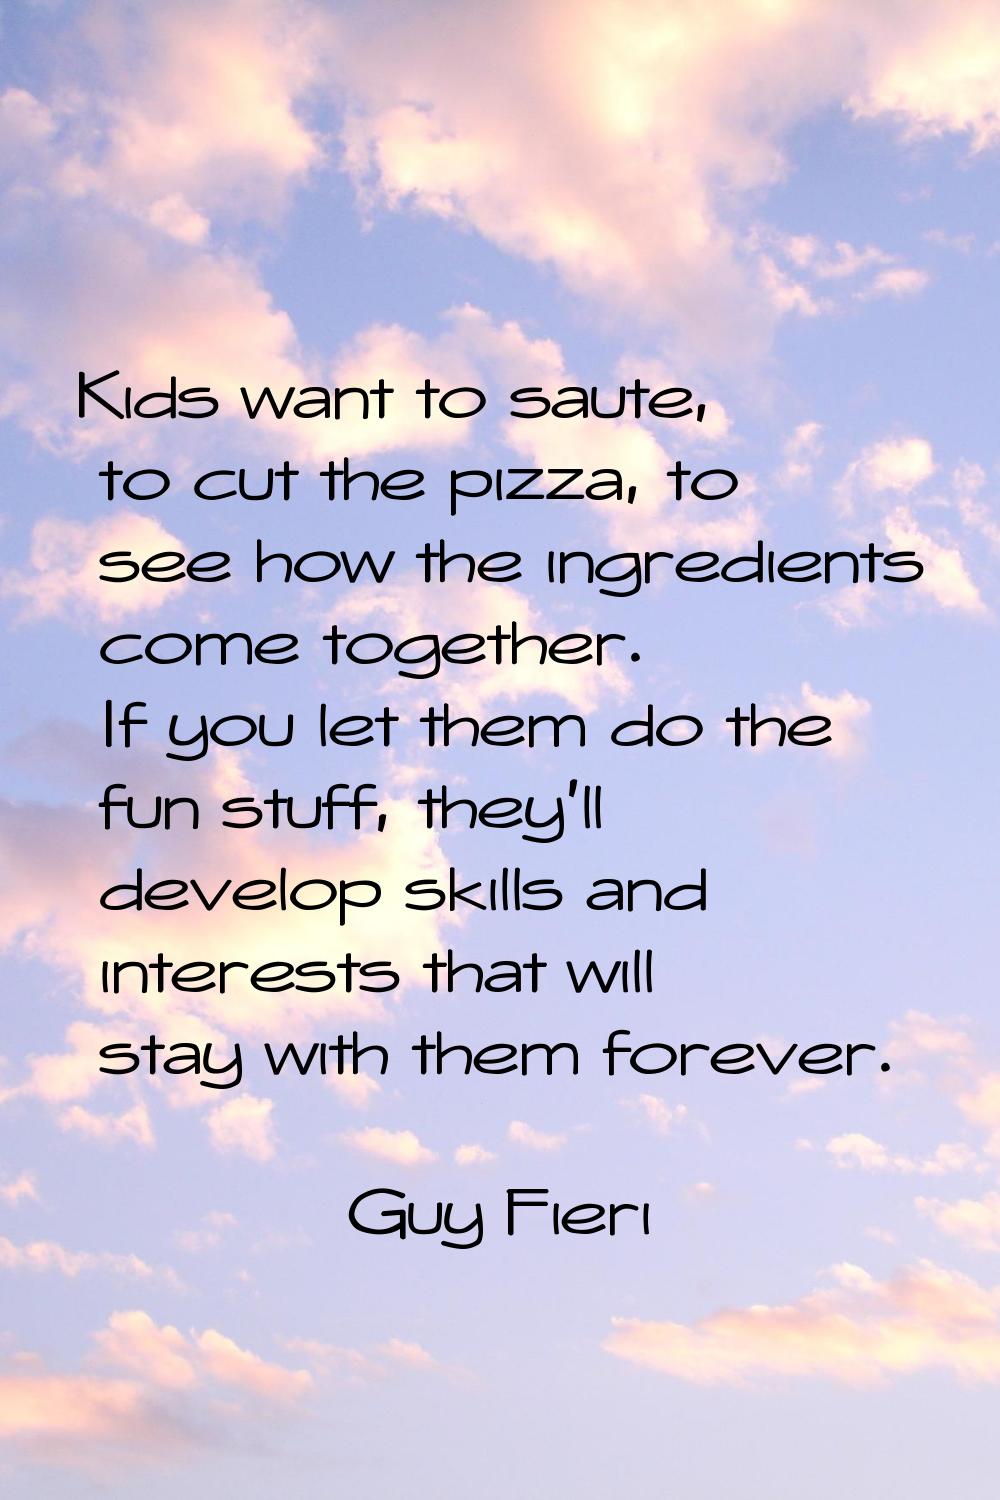 Kids want to saute, to cut the pizza, to see how the ingredients come together. If you let them do 